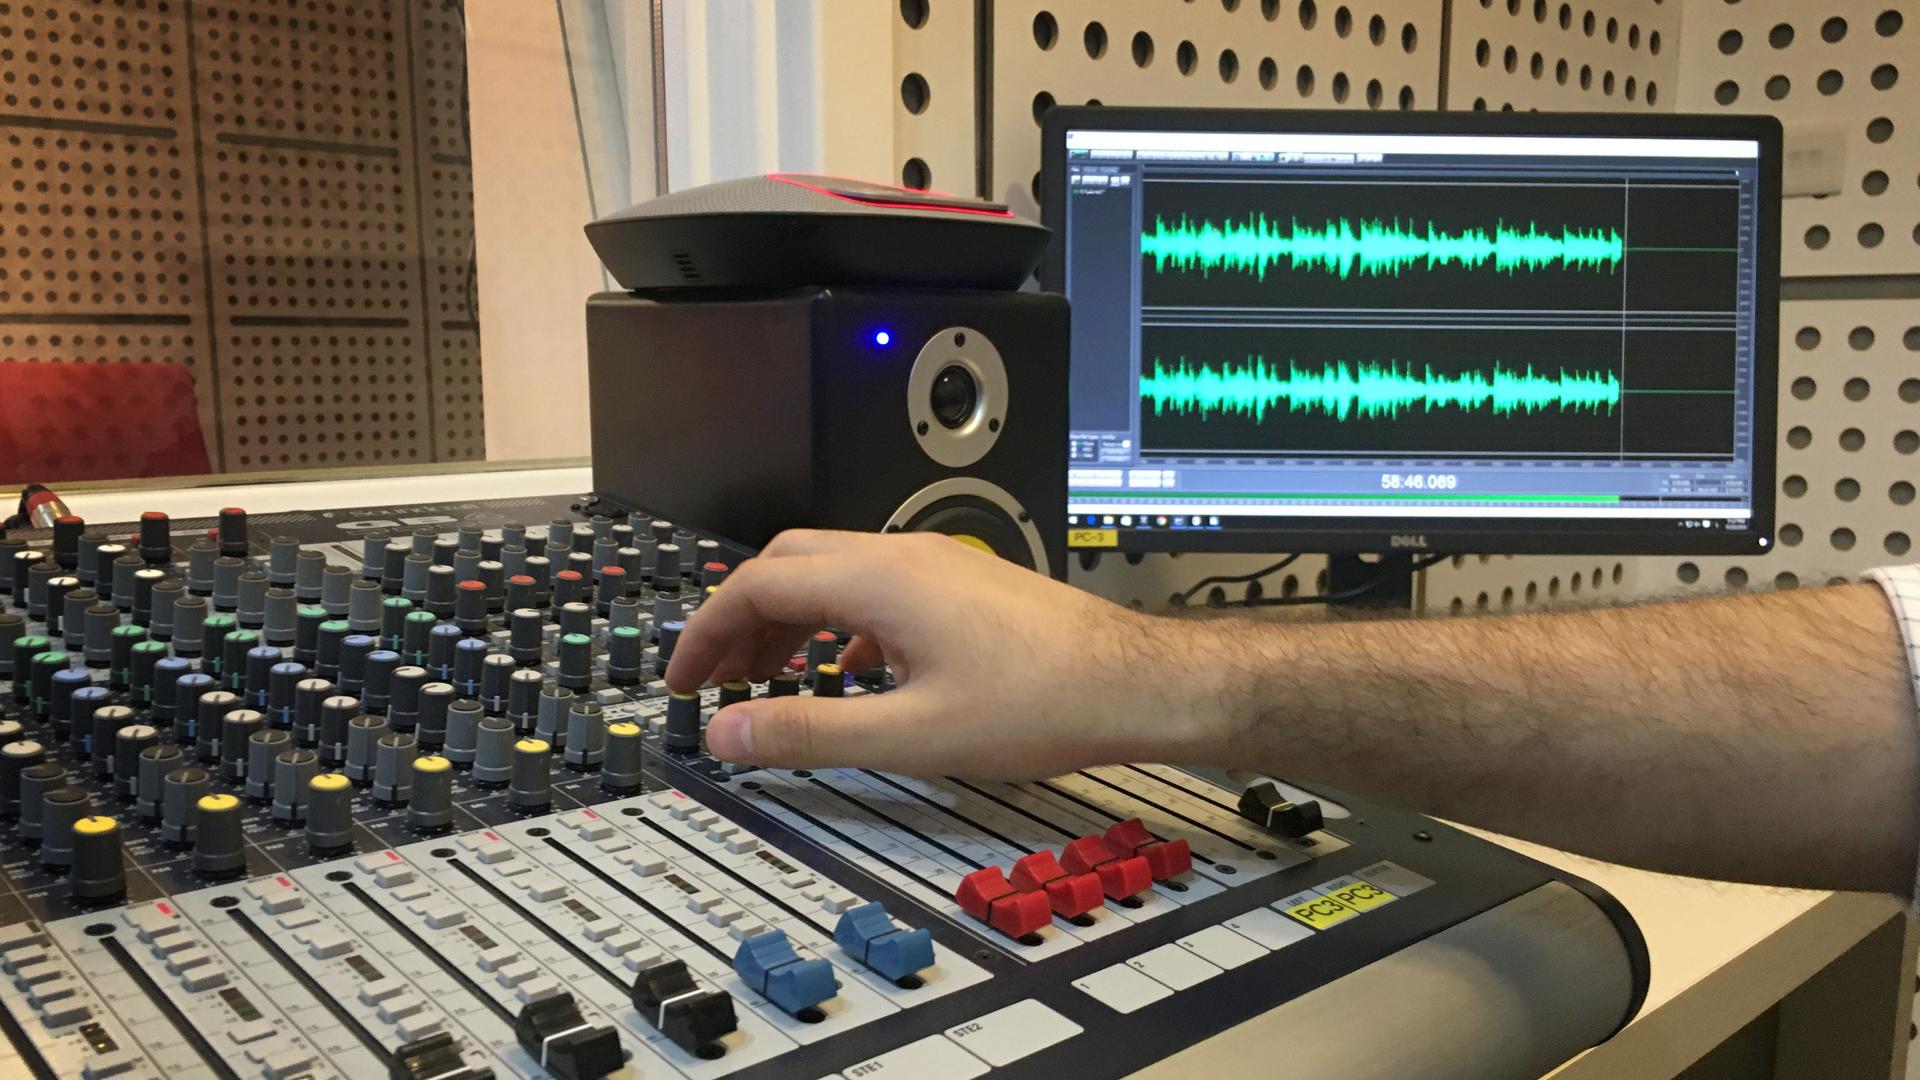 A group of Mosul exiles set up al-Ghad radio station to reach people in their city under ISIS control. The station manager says it's also helping people in the city communicate with one another.